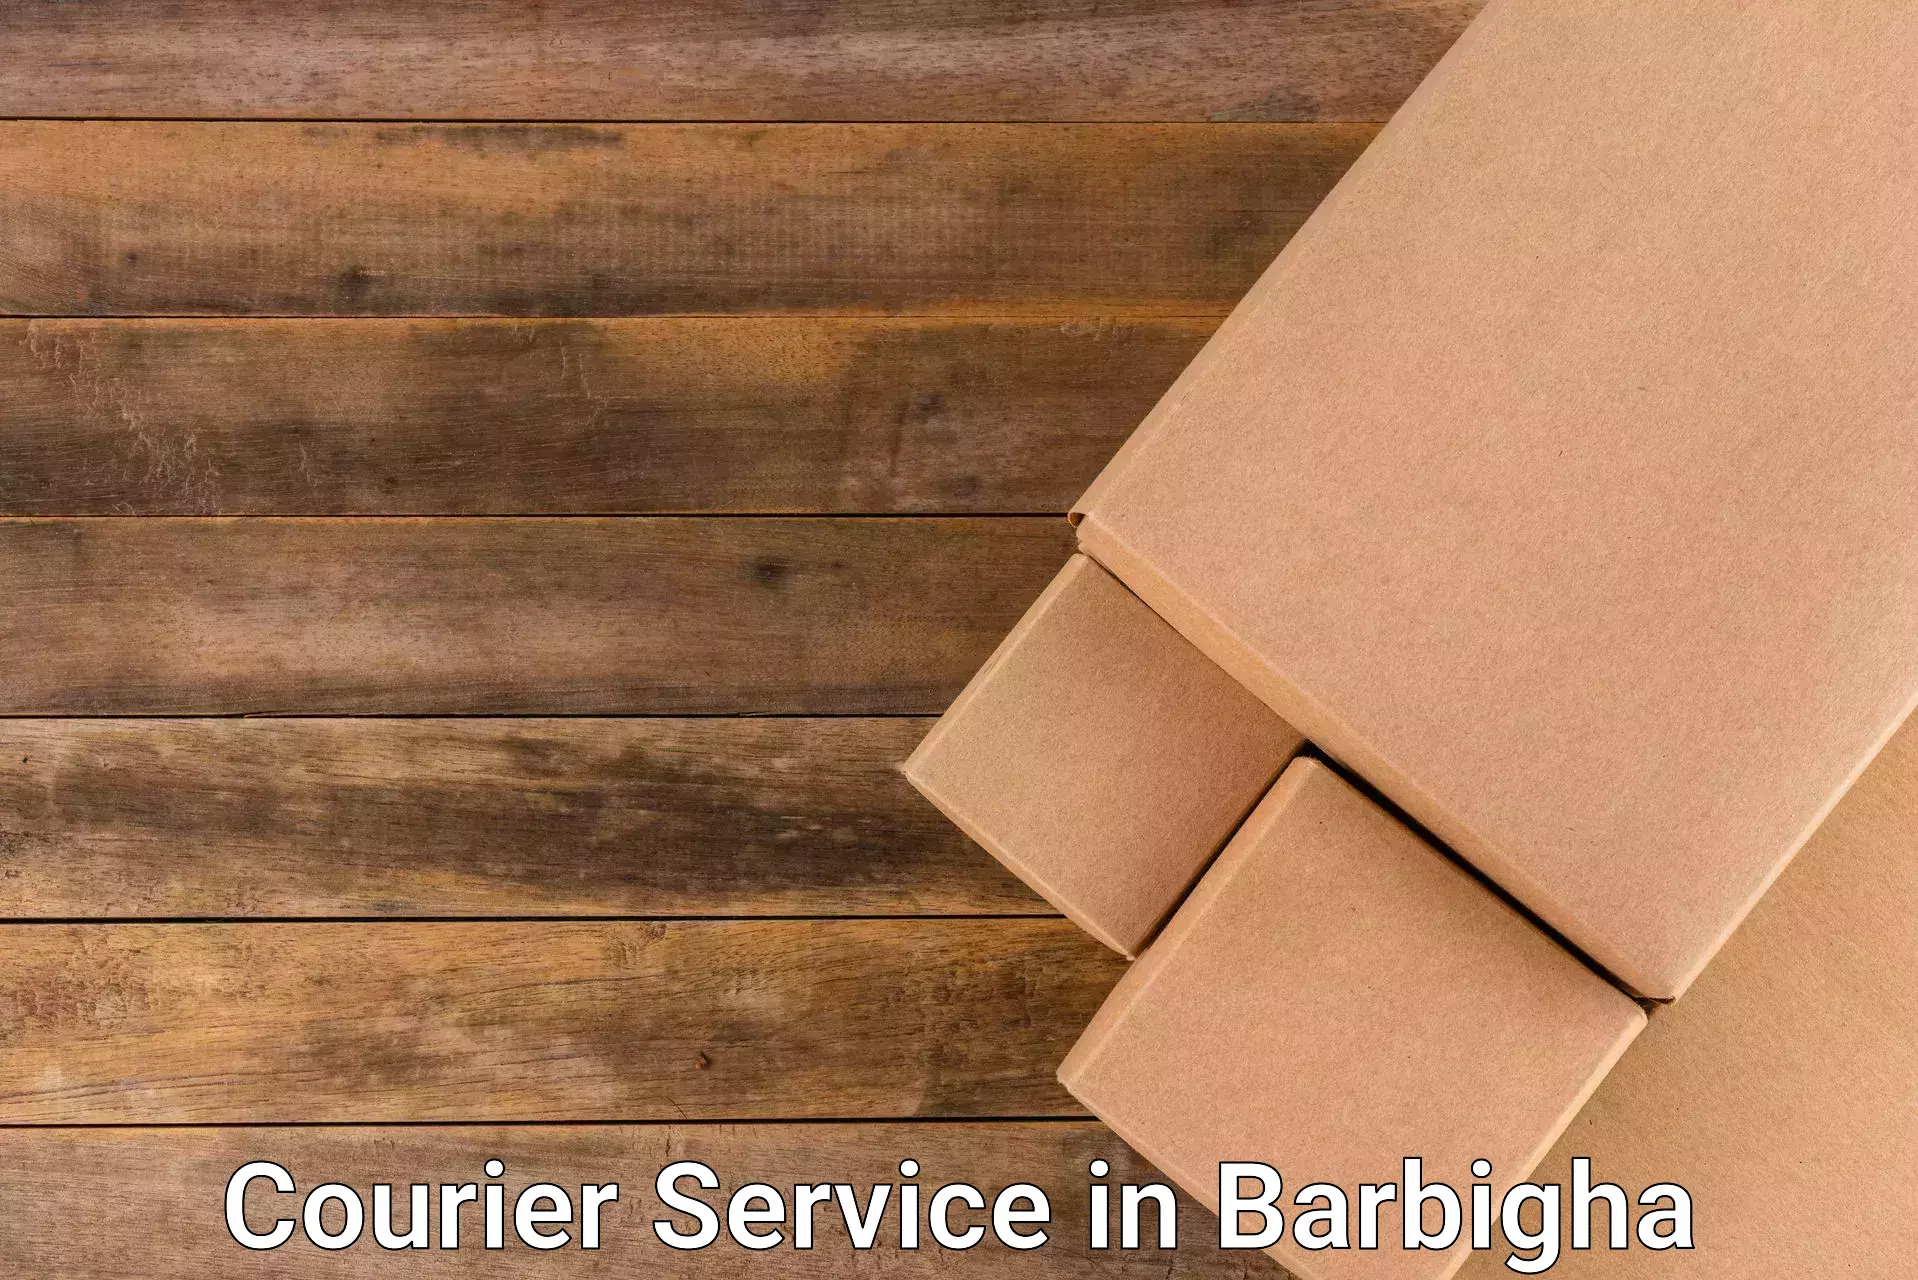 Fast shipping solutions in Barbigha